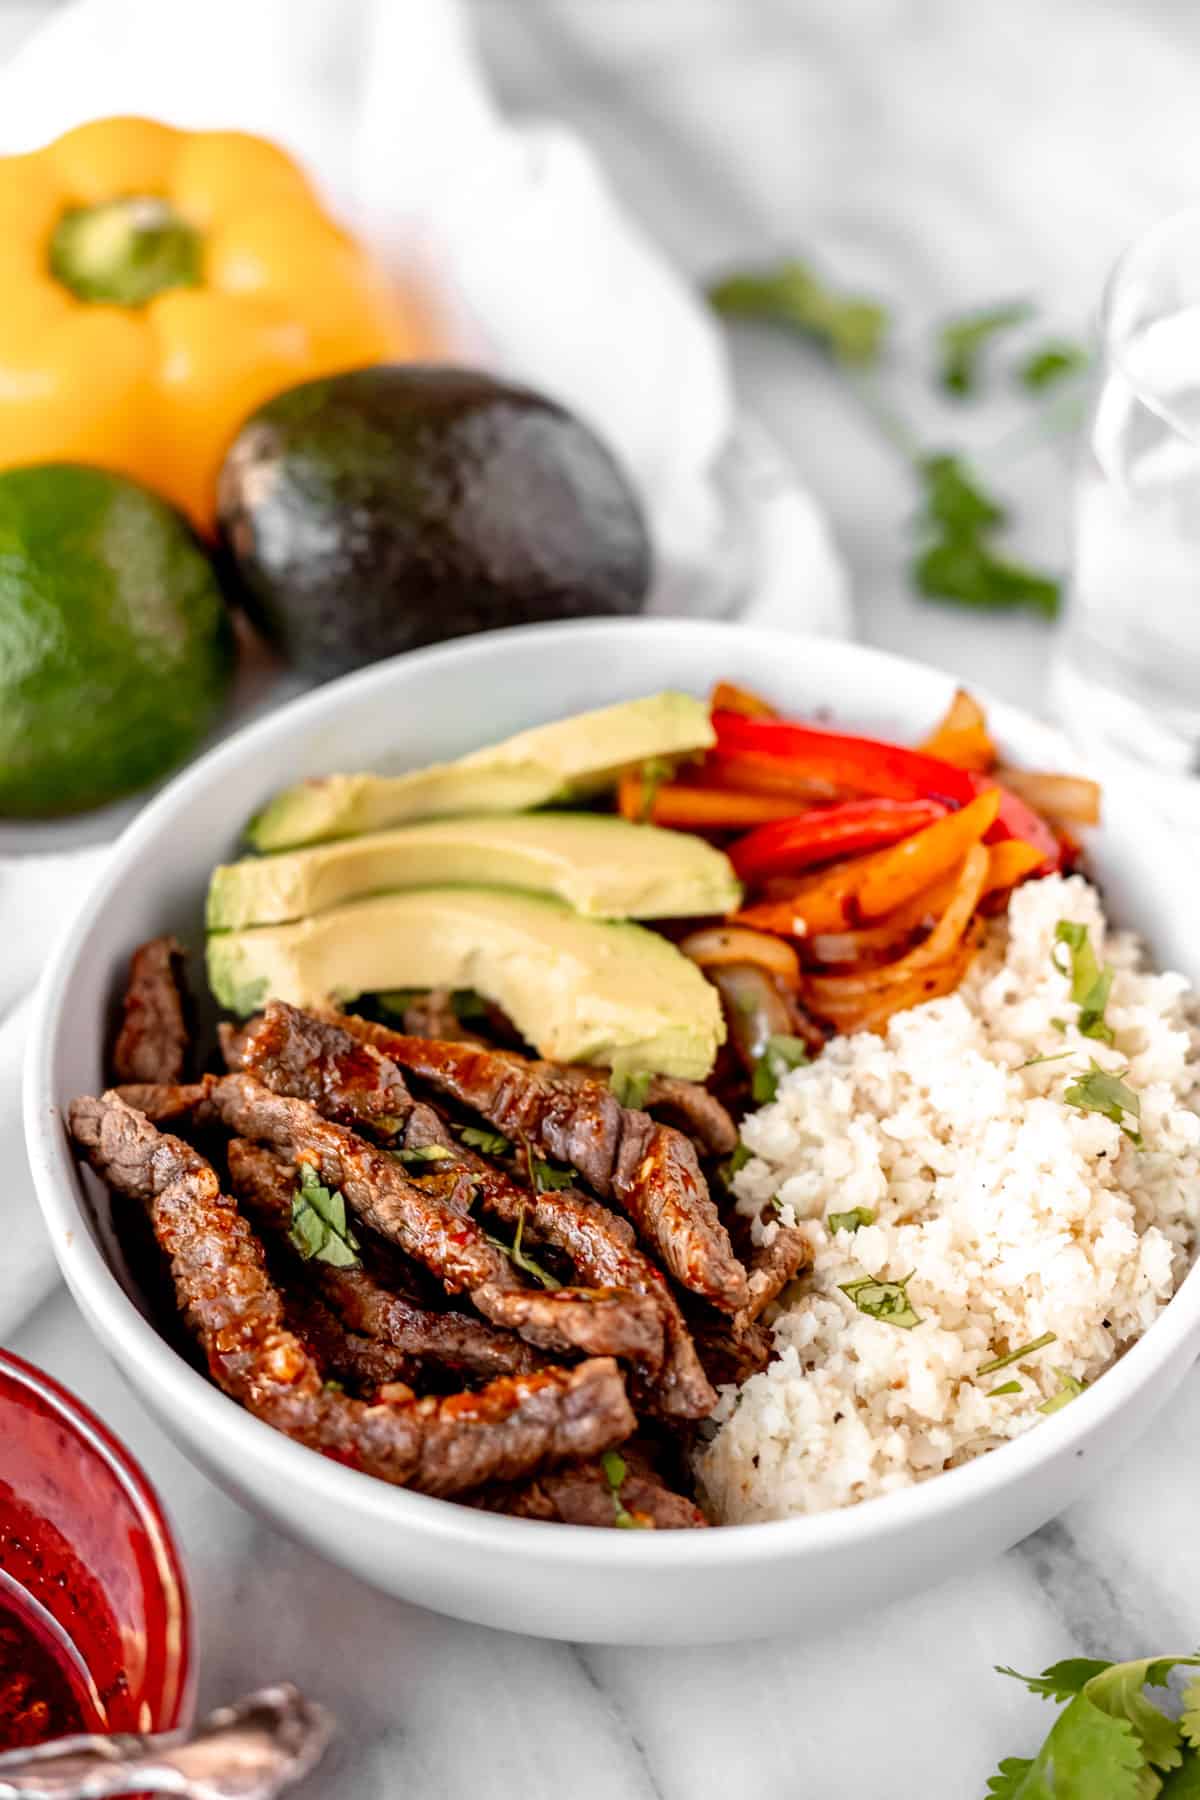 Beef fajita bowl with beef strips, peppers, cauliflower rice and avocado with vegetables and cilantro in the background.